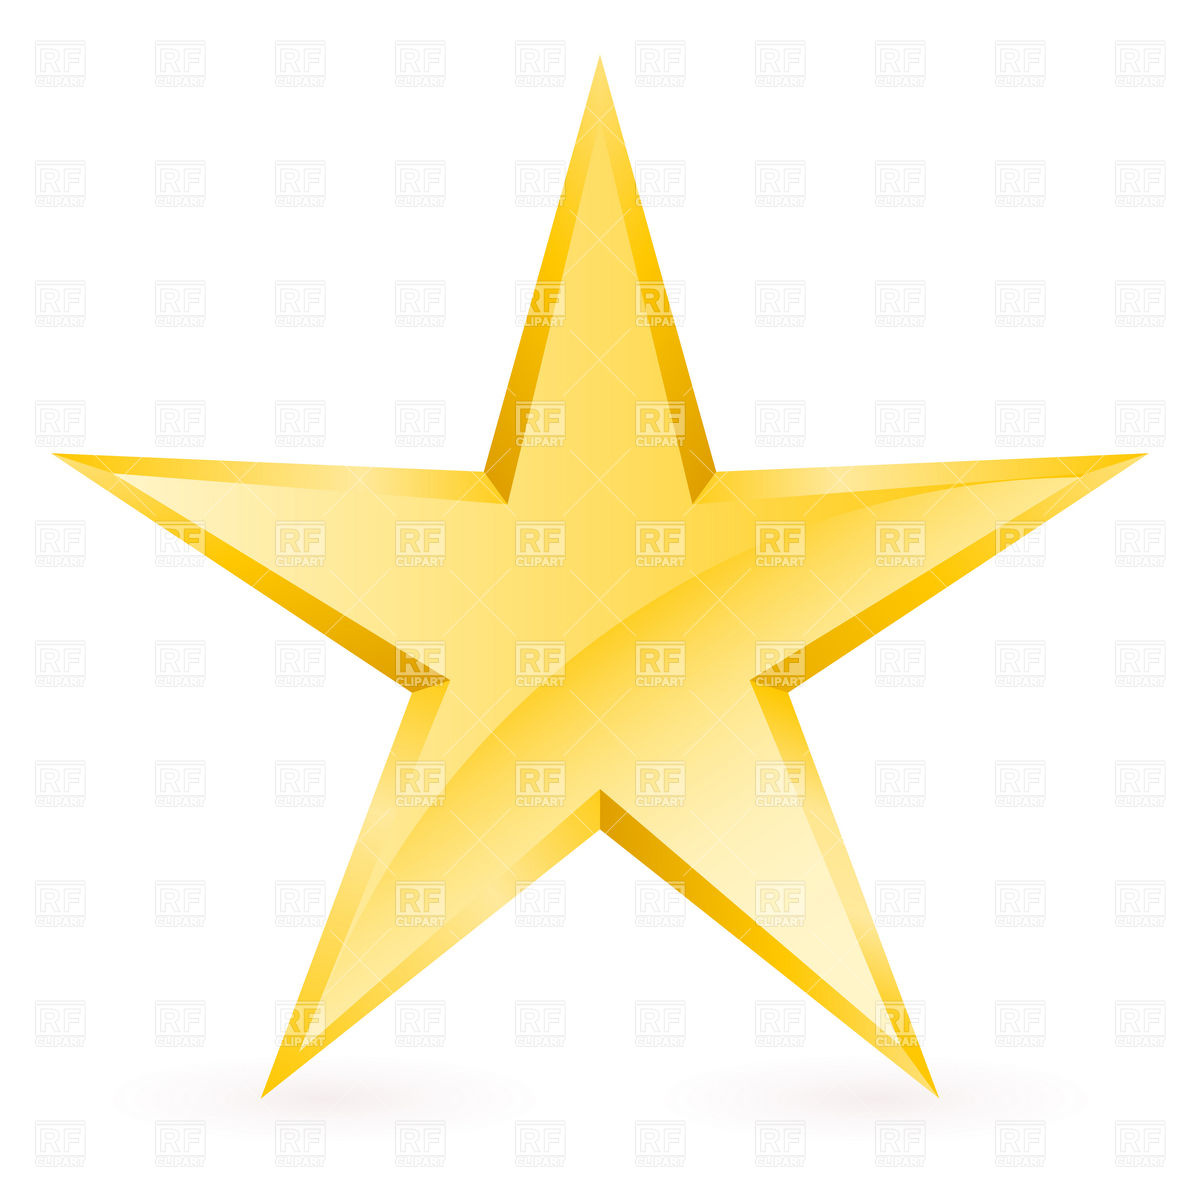 Shiny Simple Gold Star 8279 Signs Symbols Maps Download Royalty